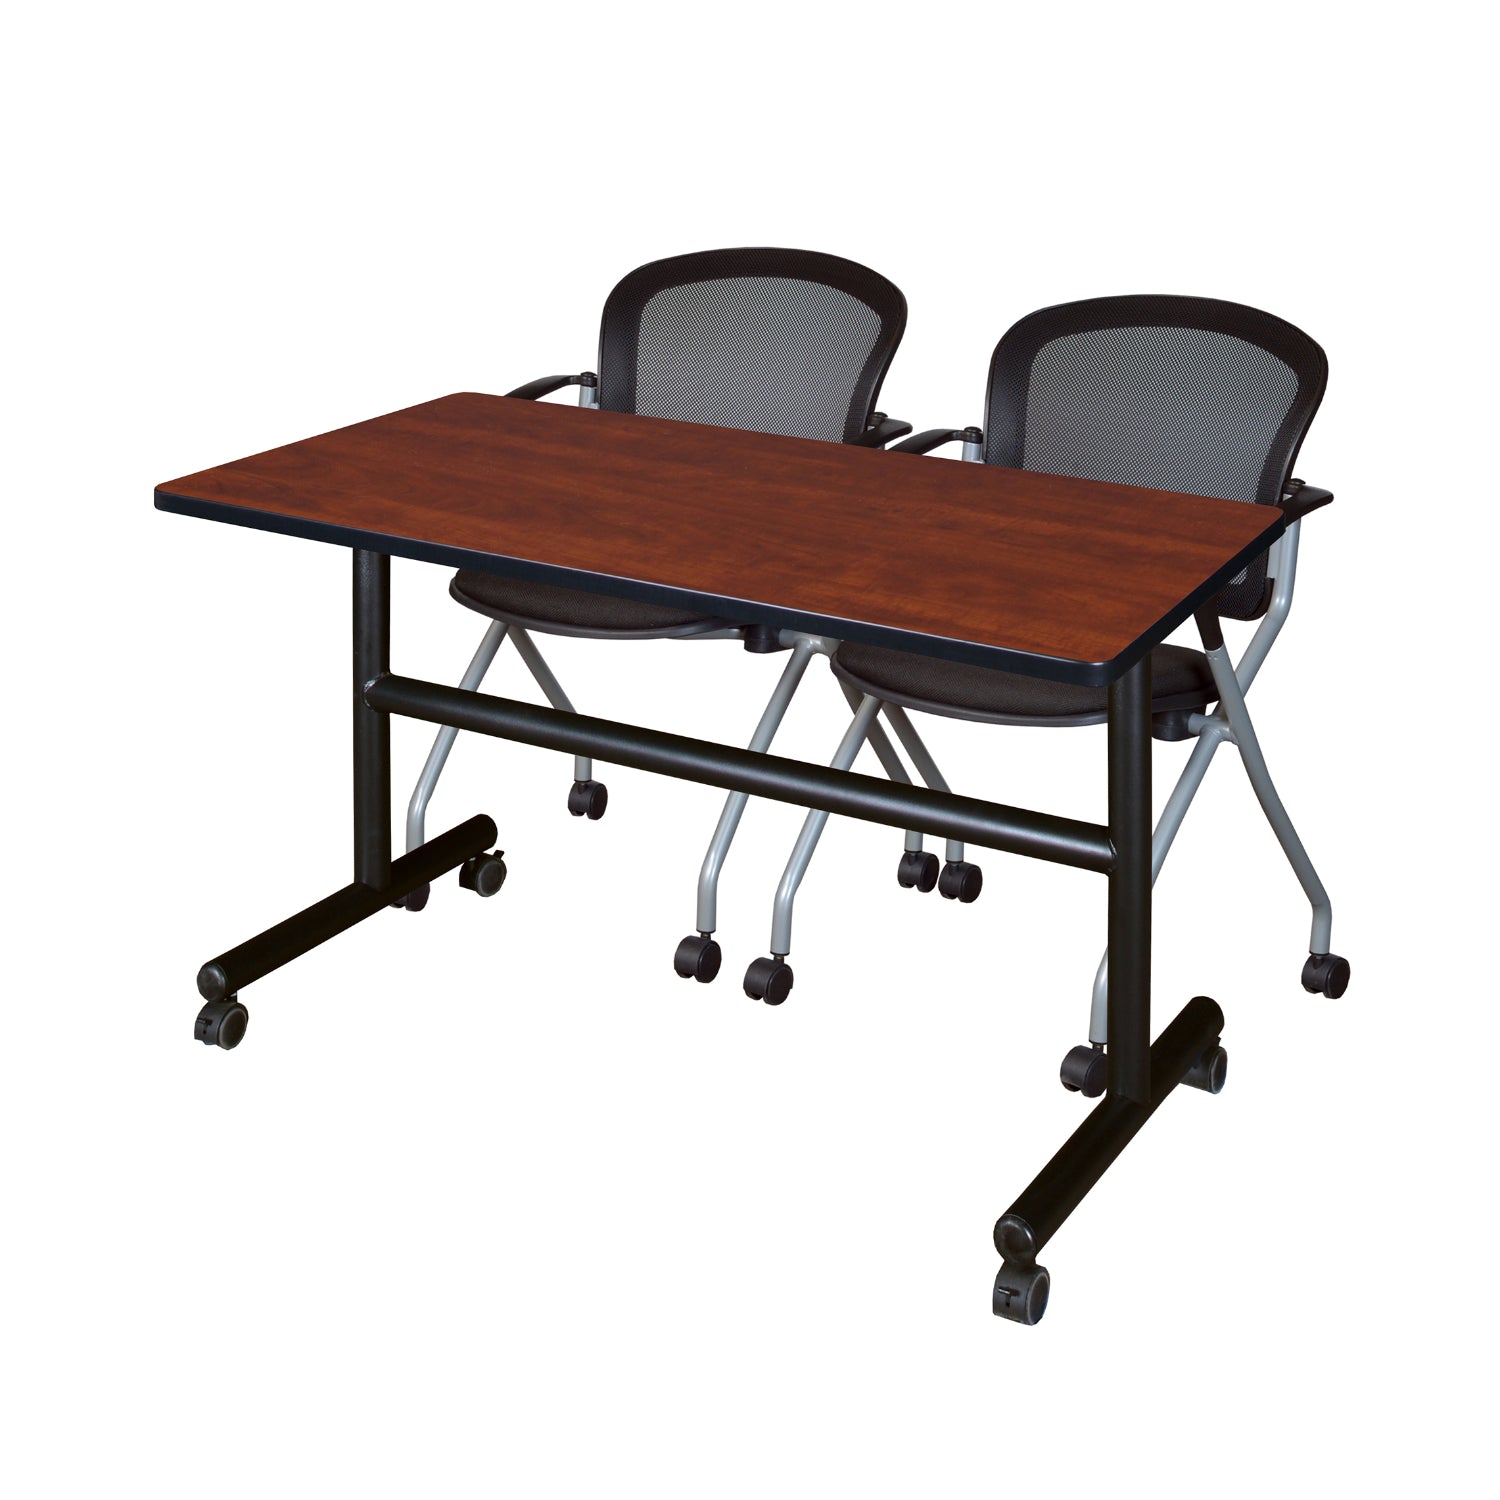 Kobe Flip Top Training Table and Chair Package, Kobe 48" x 24" Flip Top Mobile Nesting Table with 2 Cadence Nesting Chairs